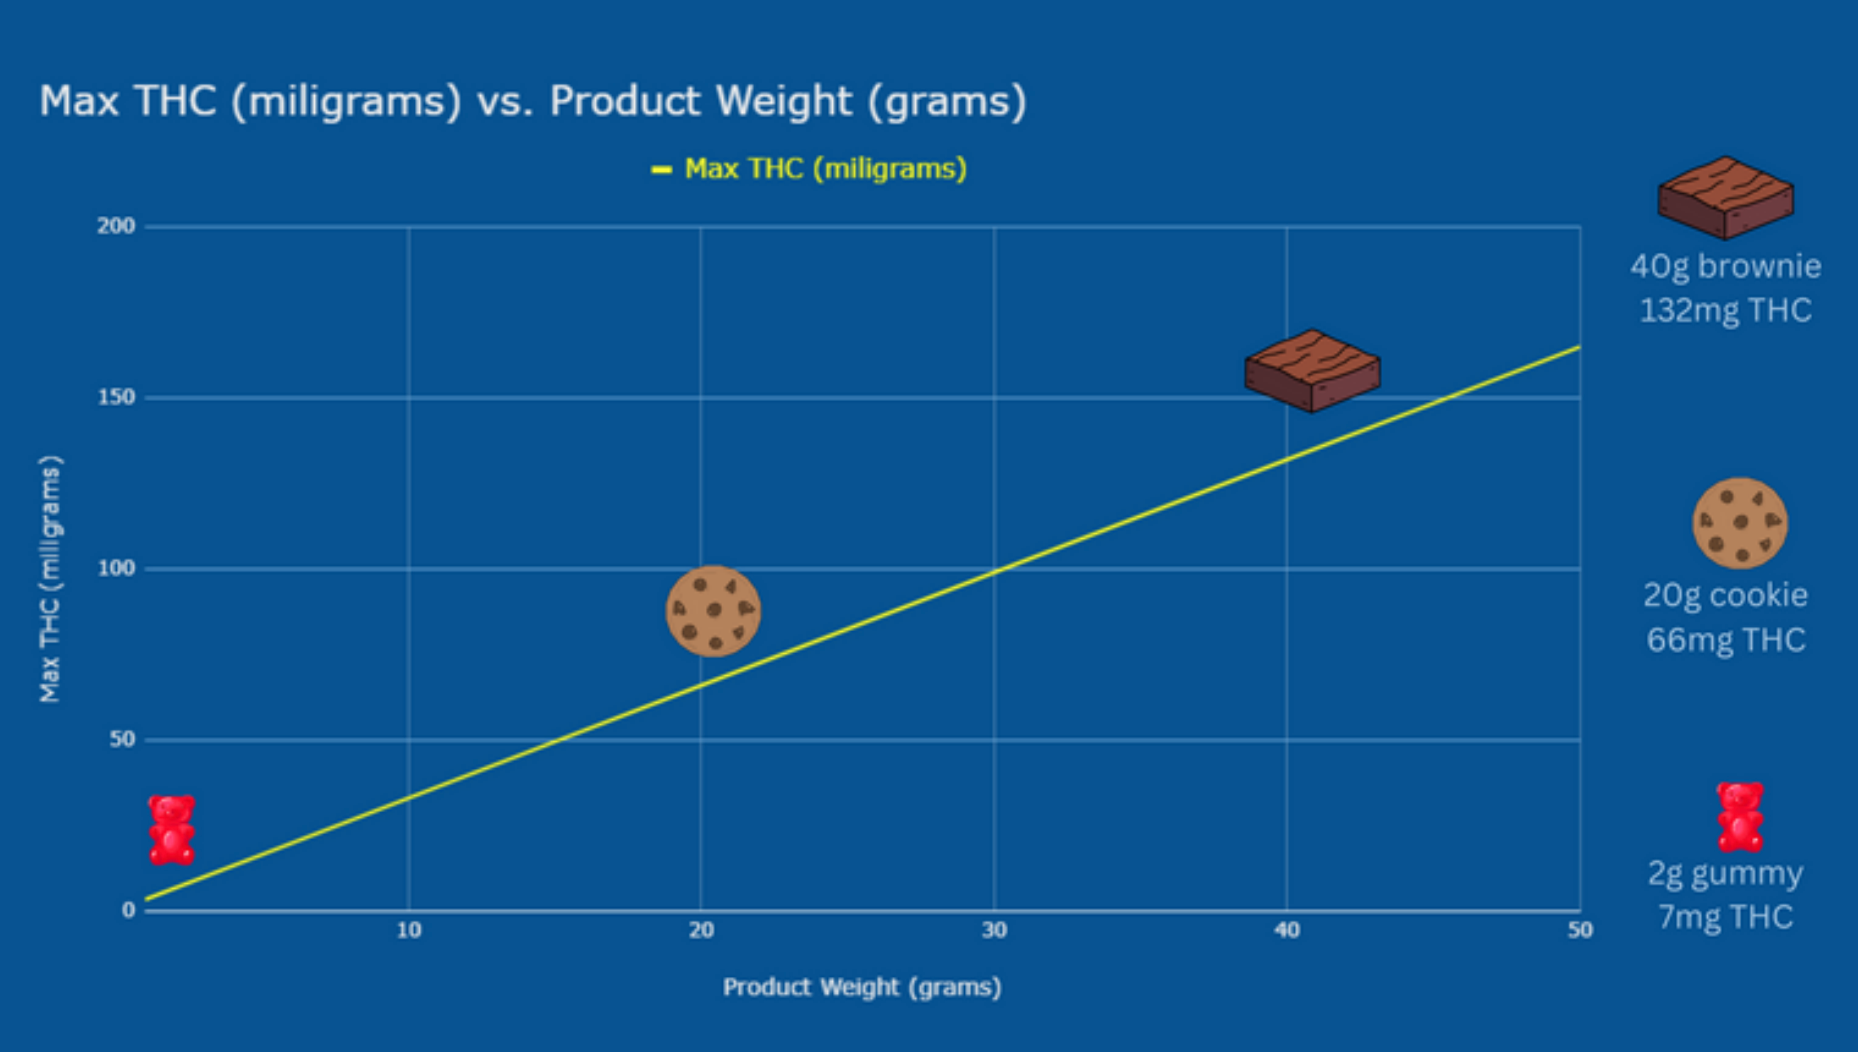 Chart showing max THC of hemp products versus product weight